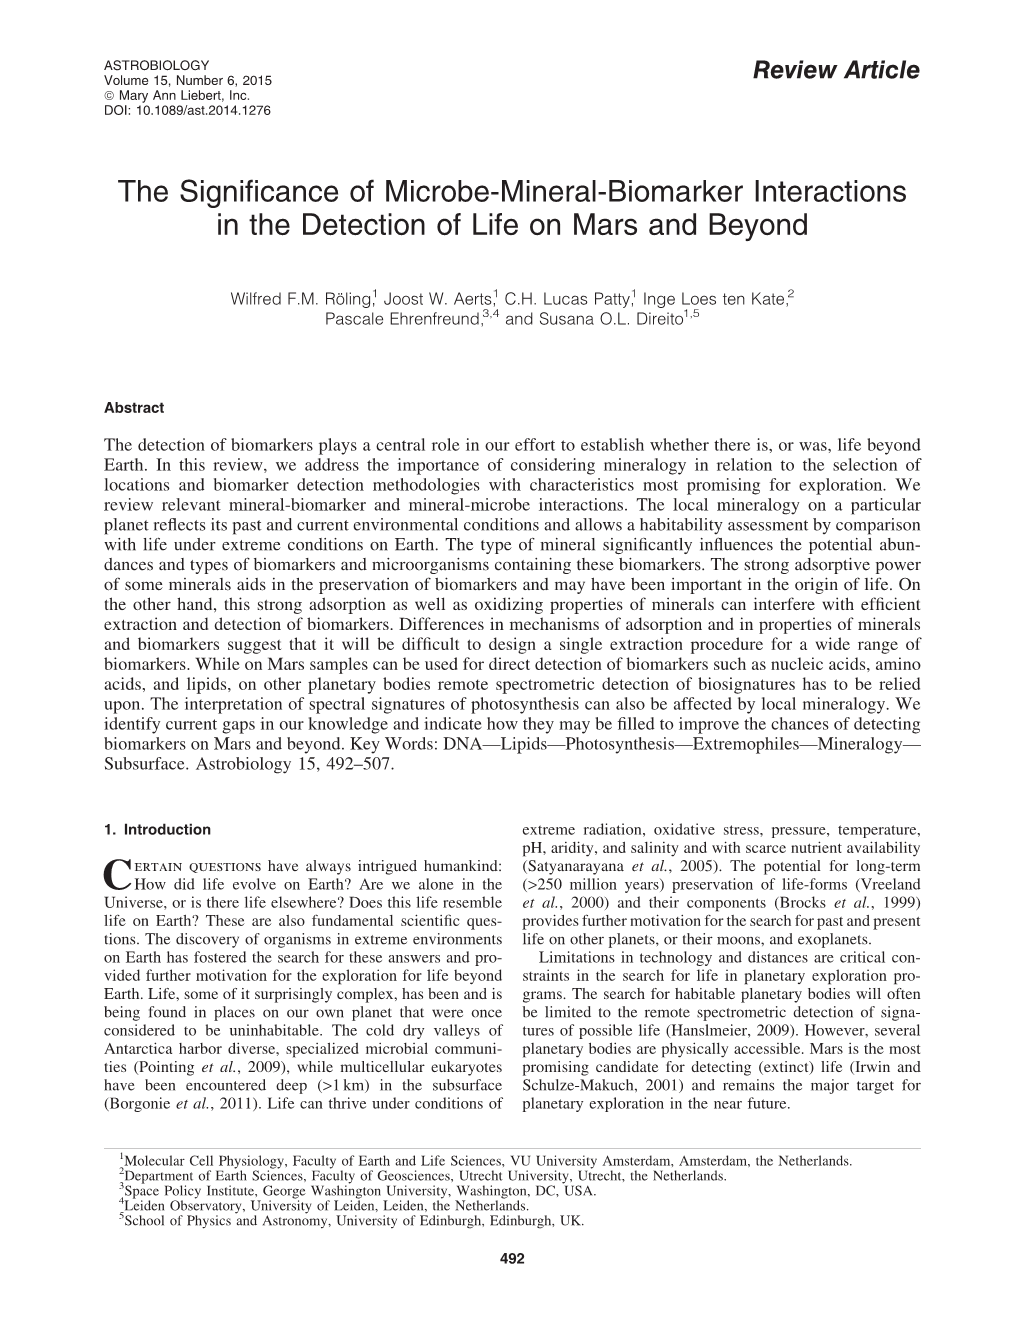 The Significance of Microbe-Mineral-Biomarker